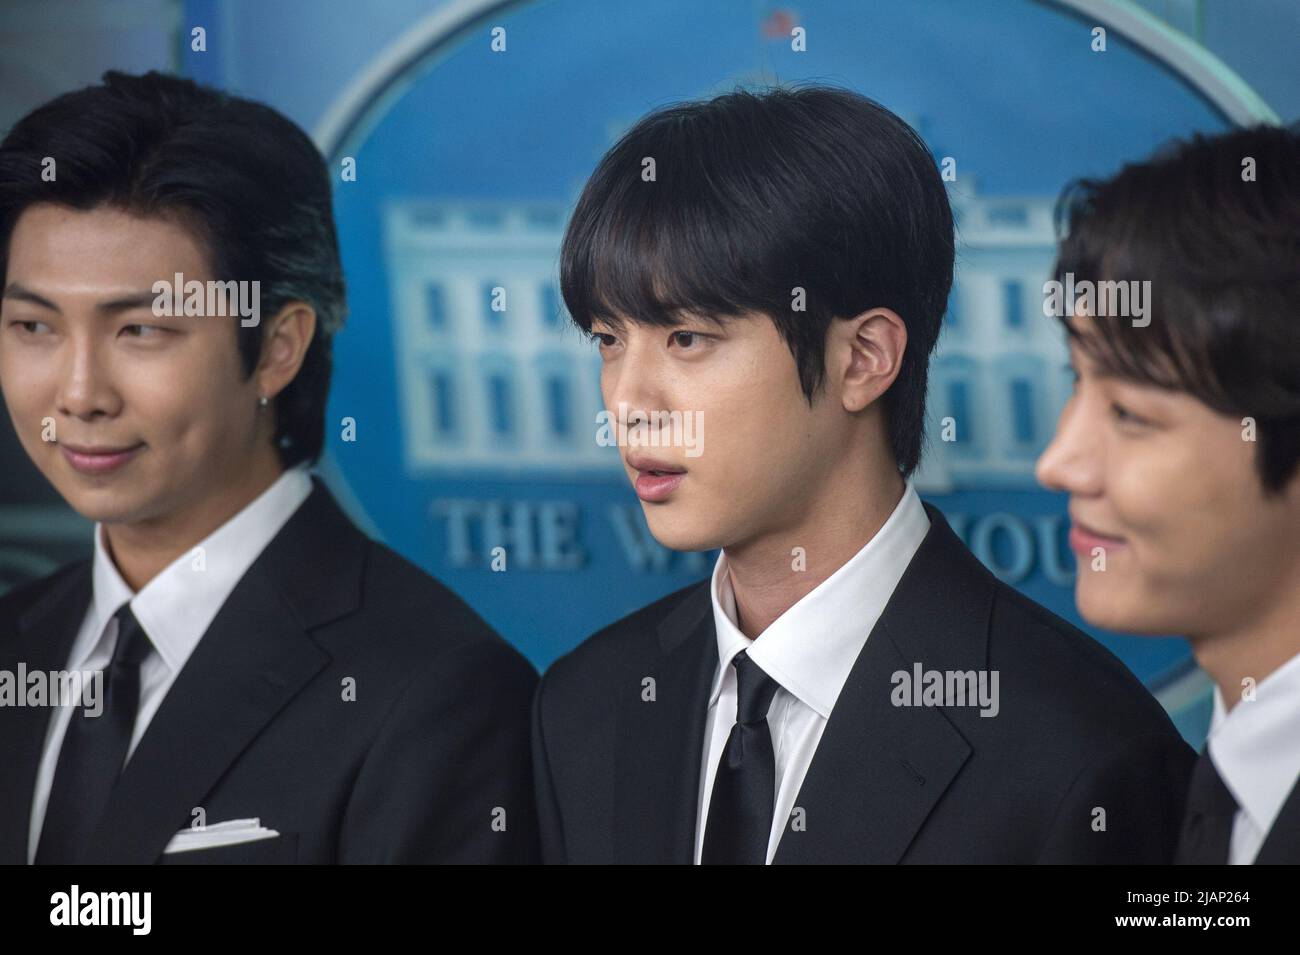 Washington, United States. 31st May, 2022. Kim Nam-Joon, Kim Seok-jin, and Jung Ho-seok, members of the Korean Pop band BTS, look on during the daily press briefing at the White House in Washington, DC on Tuesday, May 31, 2022. Afterwards, BTS met with President Joe Biden in the Oval Office to discuss Anti-Asian discrimination and Asian inclusion and representation. Photo by Bonnie Cash/UPI Credit: UPI/Alamy Live News Stock Photo